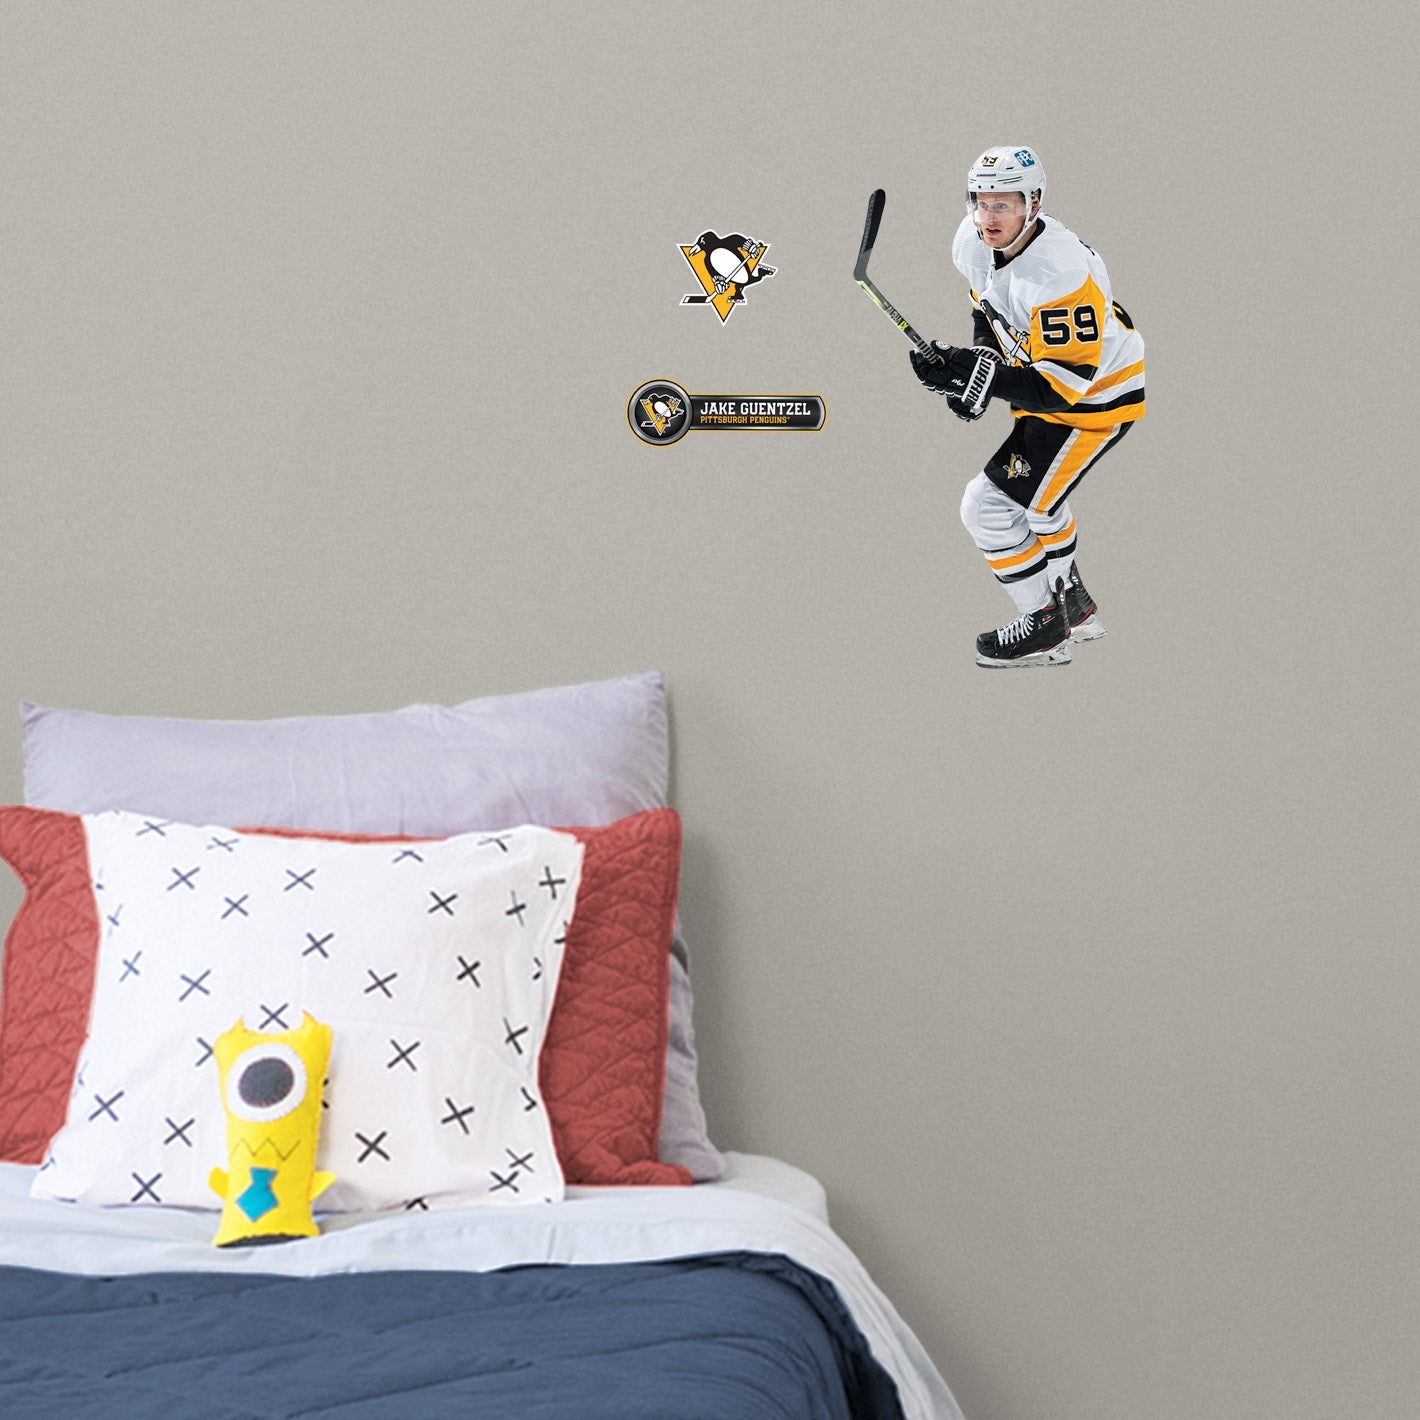 Pittsburgh Penguins: Jake Guentzel - Officially Licensed NHL Removable Adhesive Decal